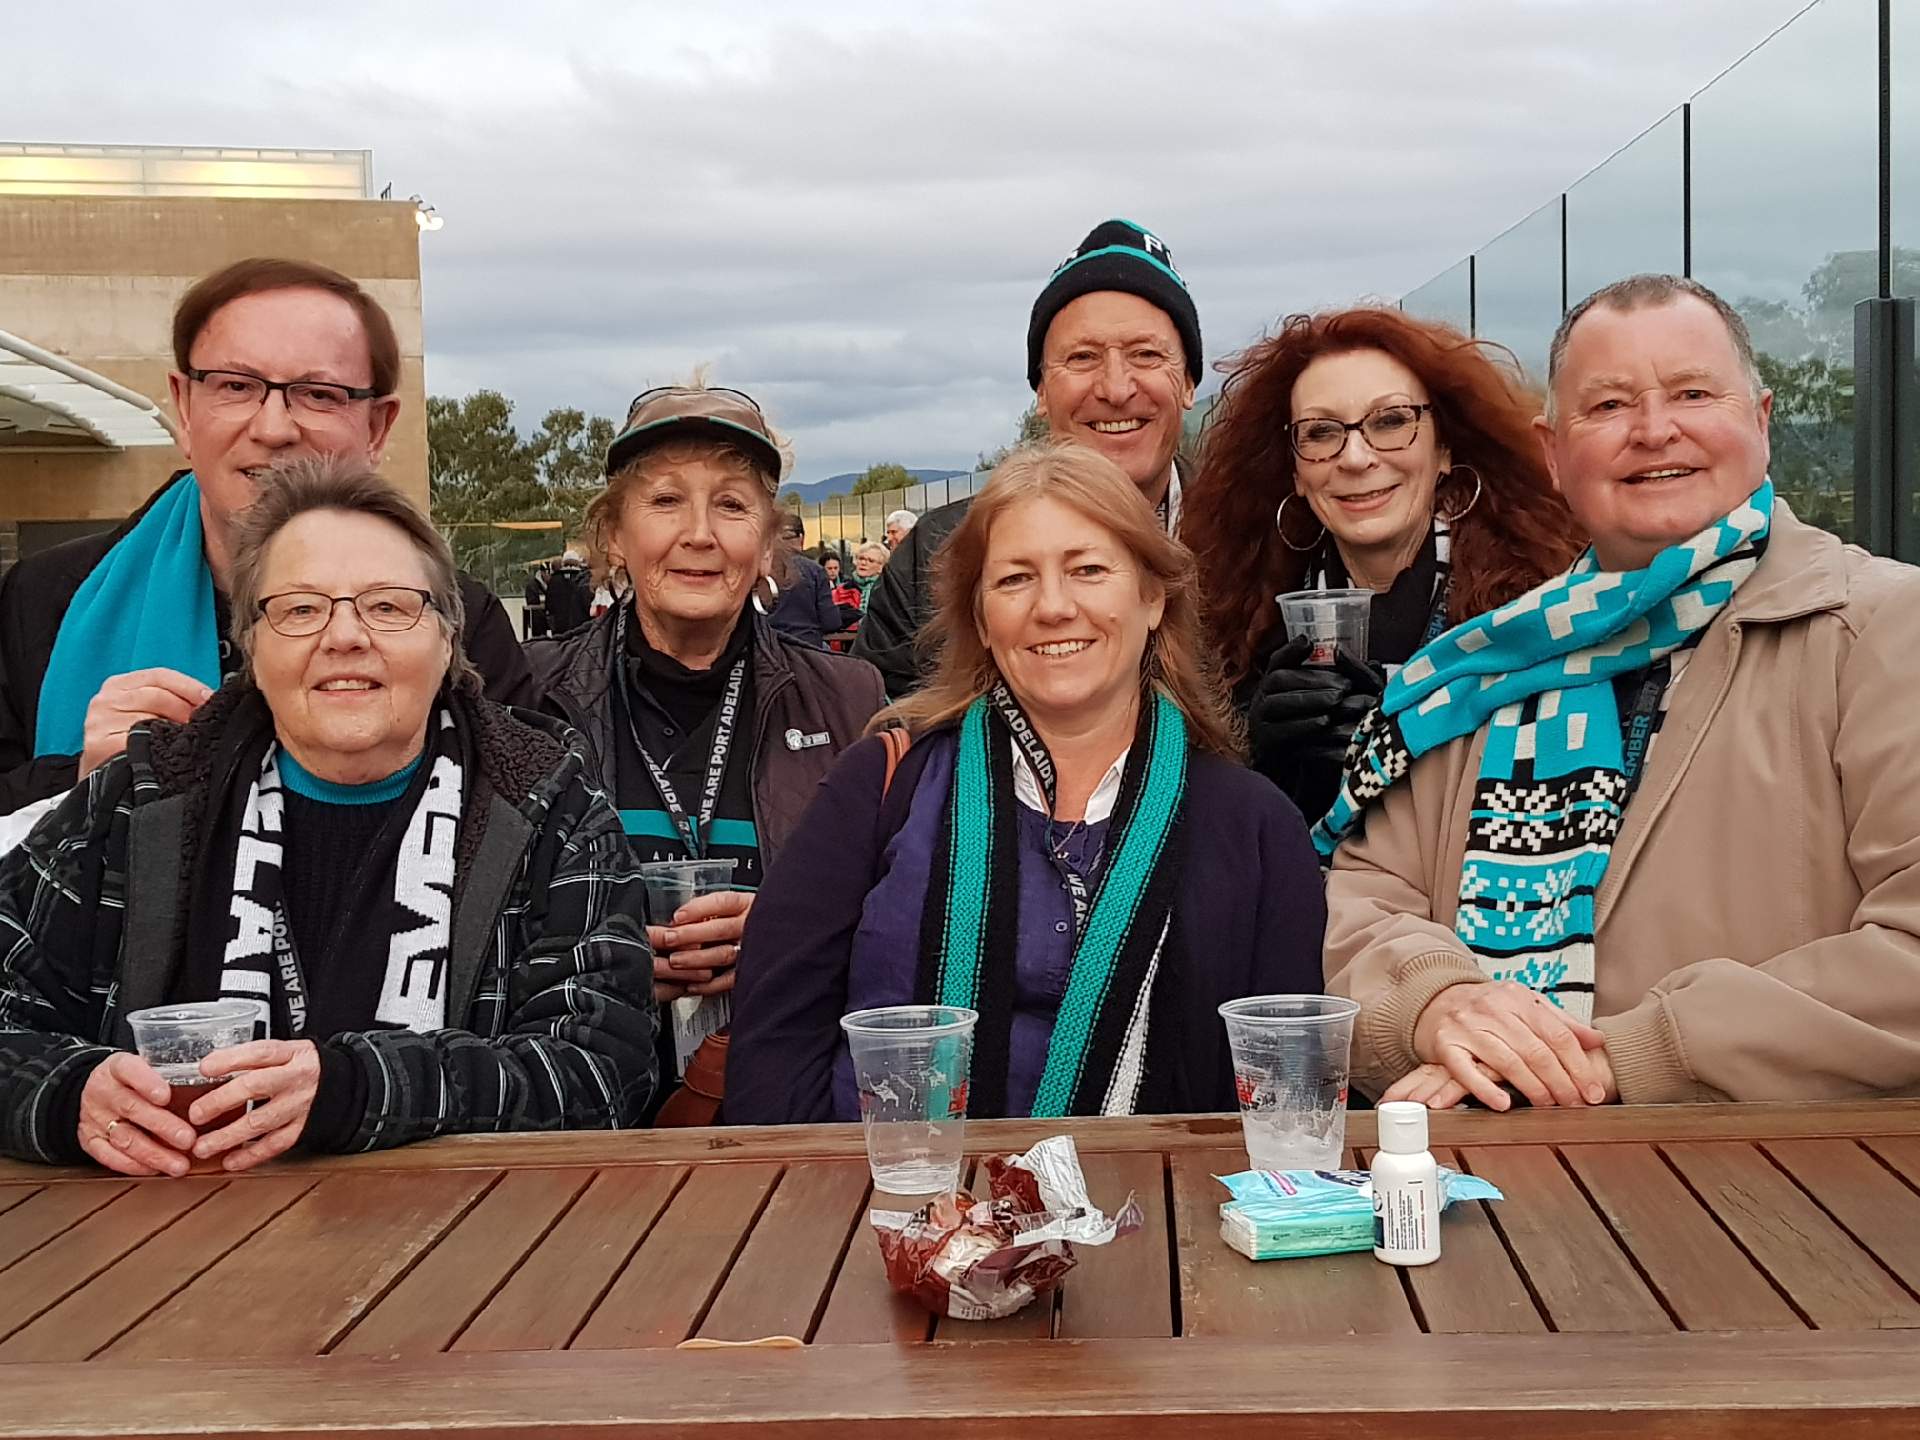 Port Adelaide's final home game with friends on Saturday, Aug 26.